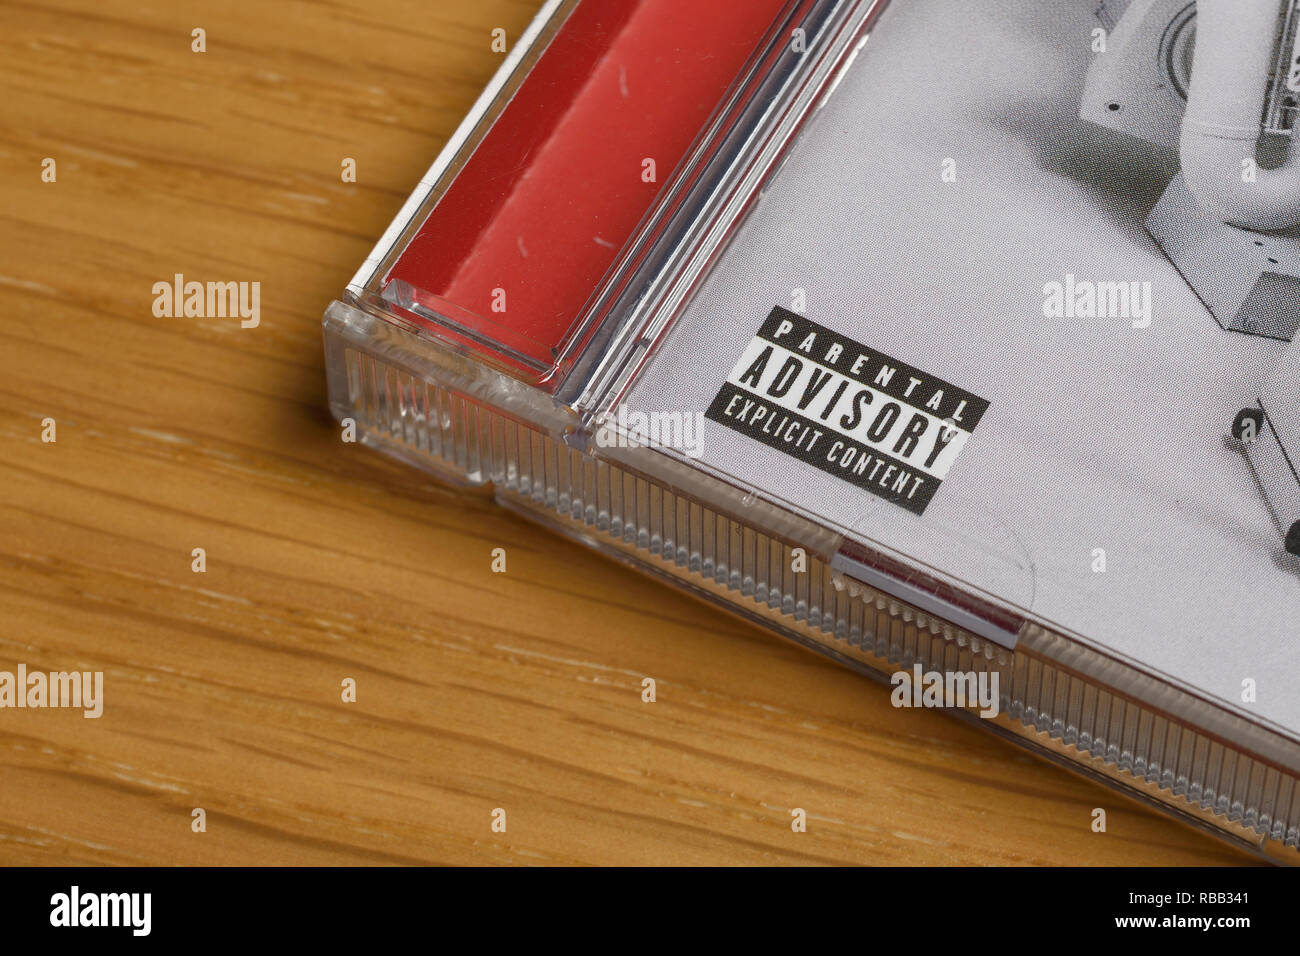 A Parental Advisory label on a compact disc case Stock Photo